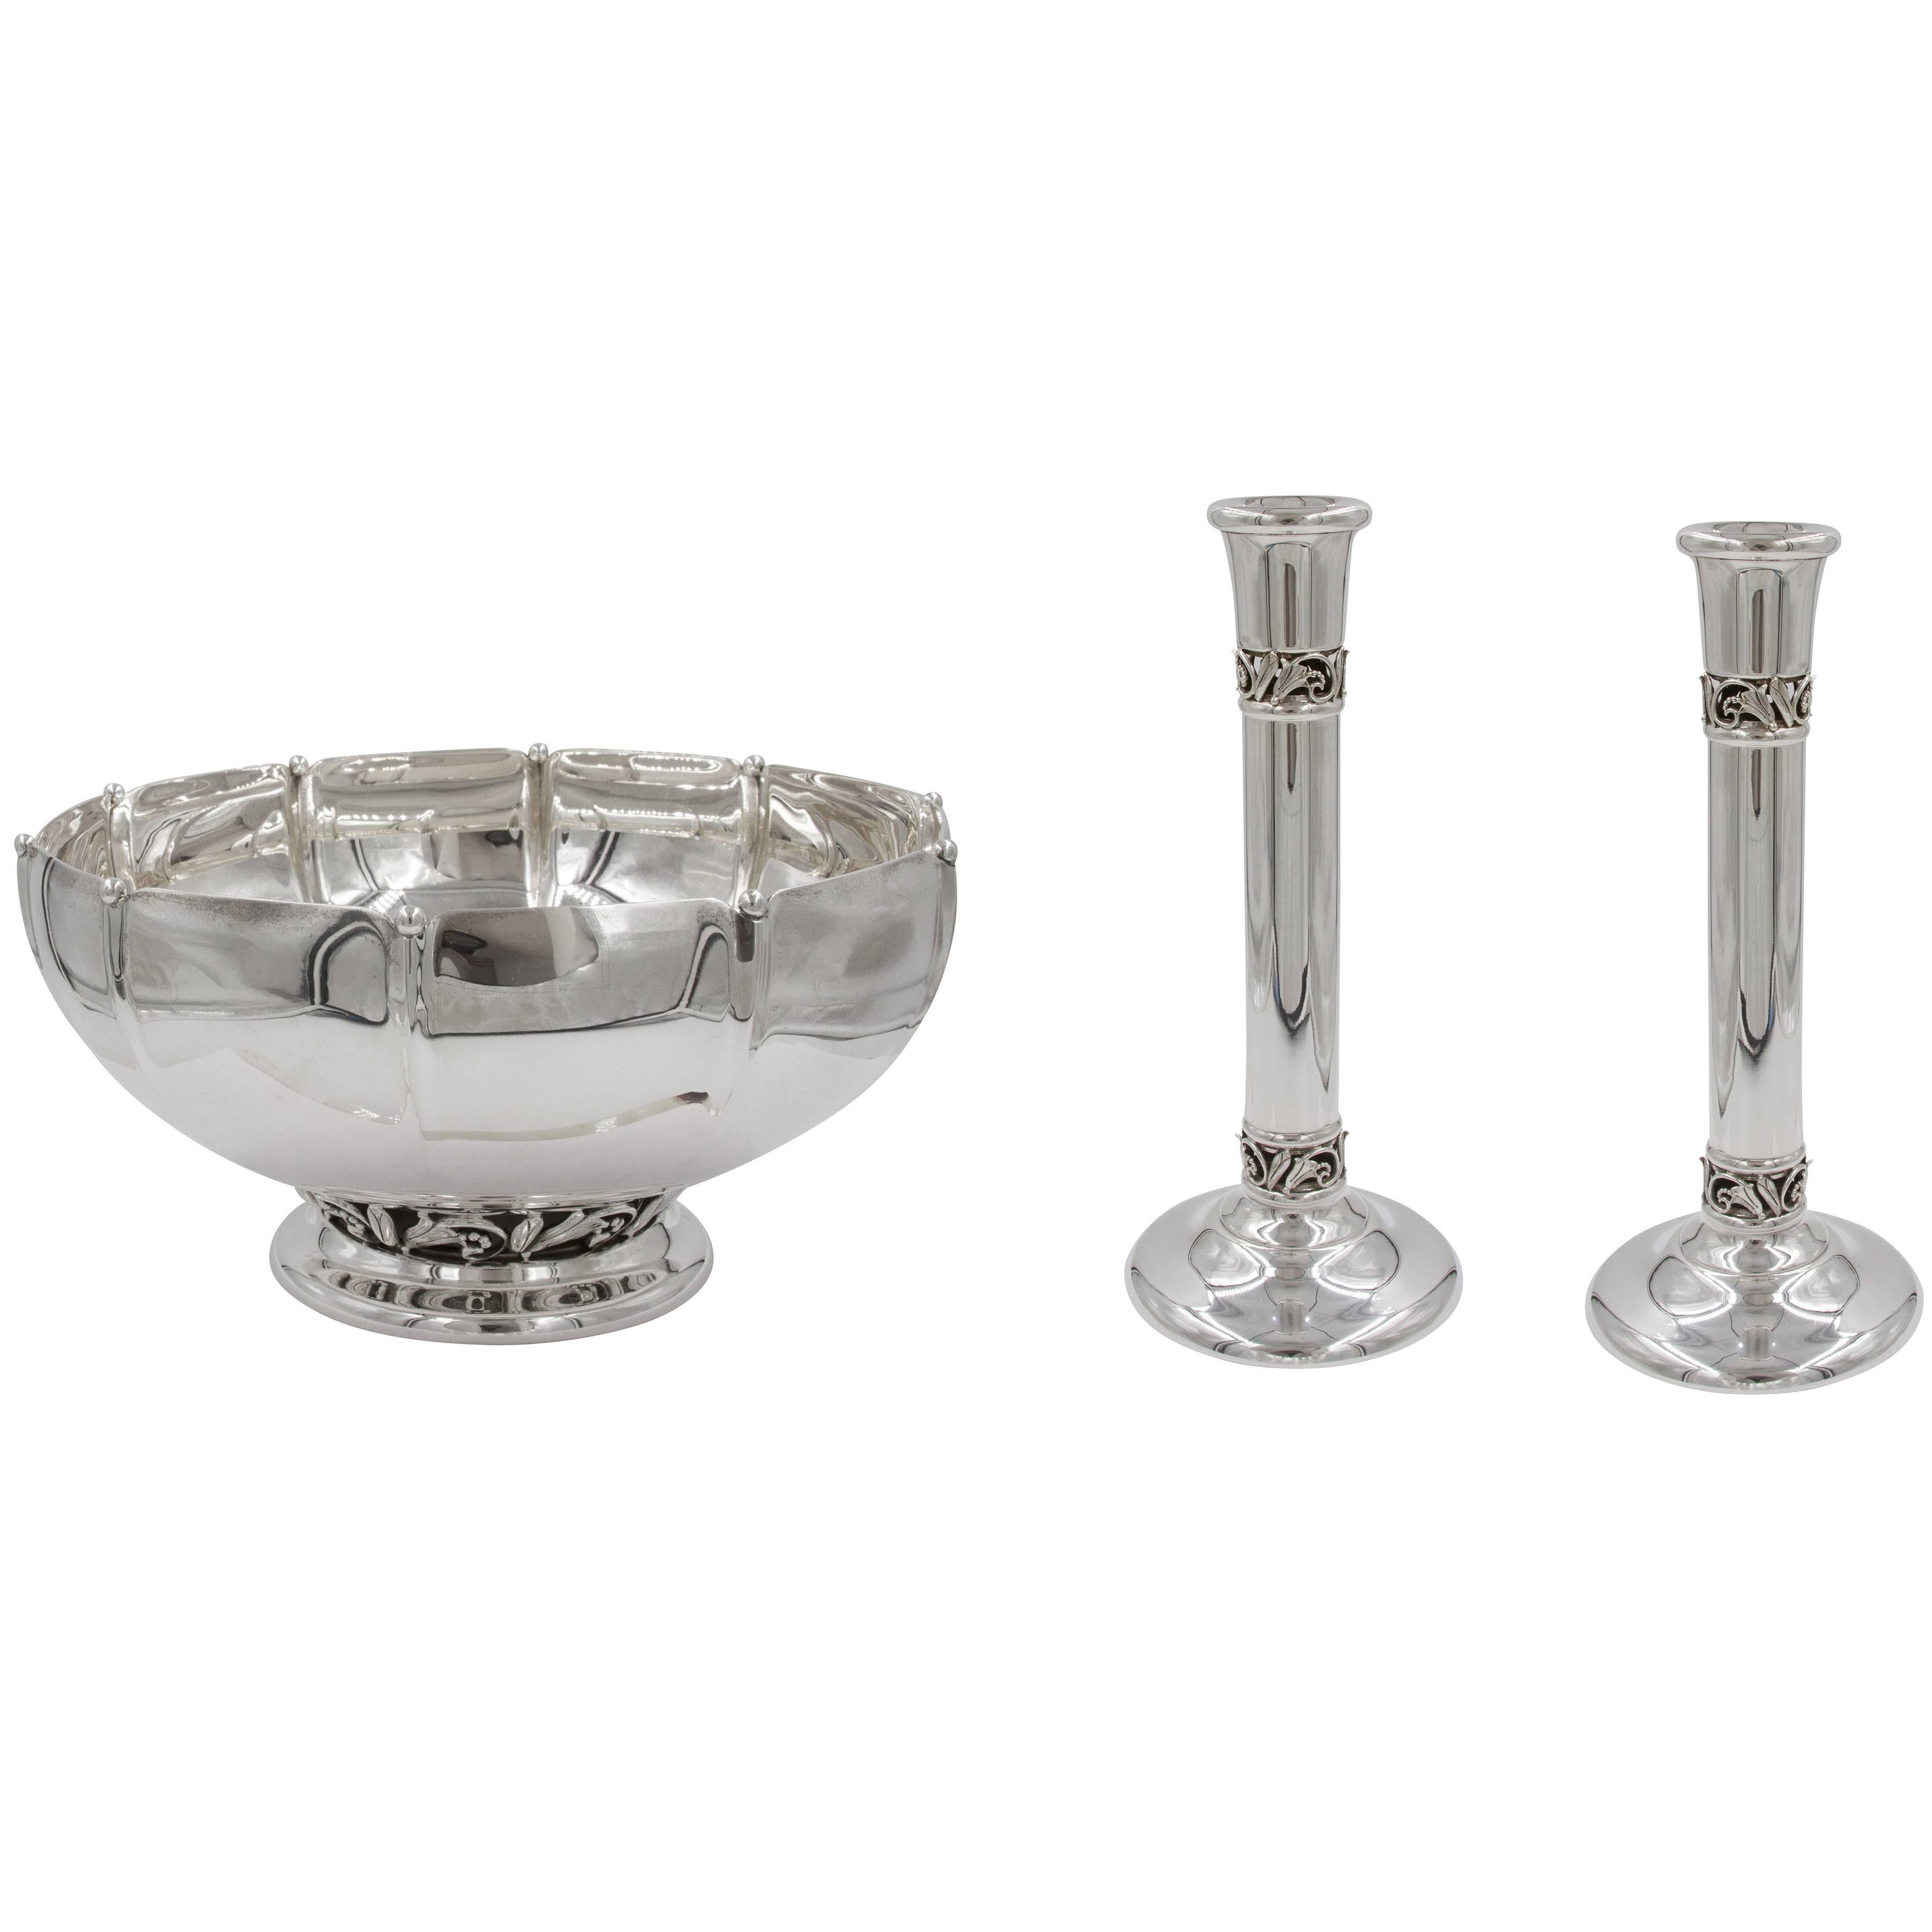 Candlesticks with Matching Bowl